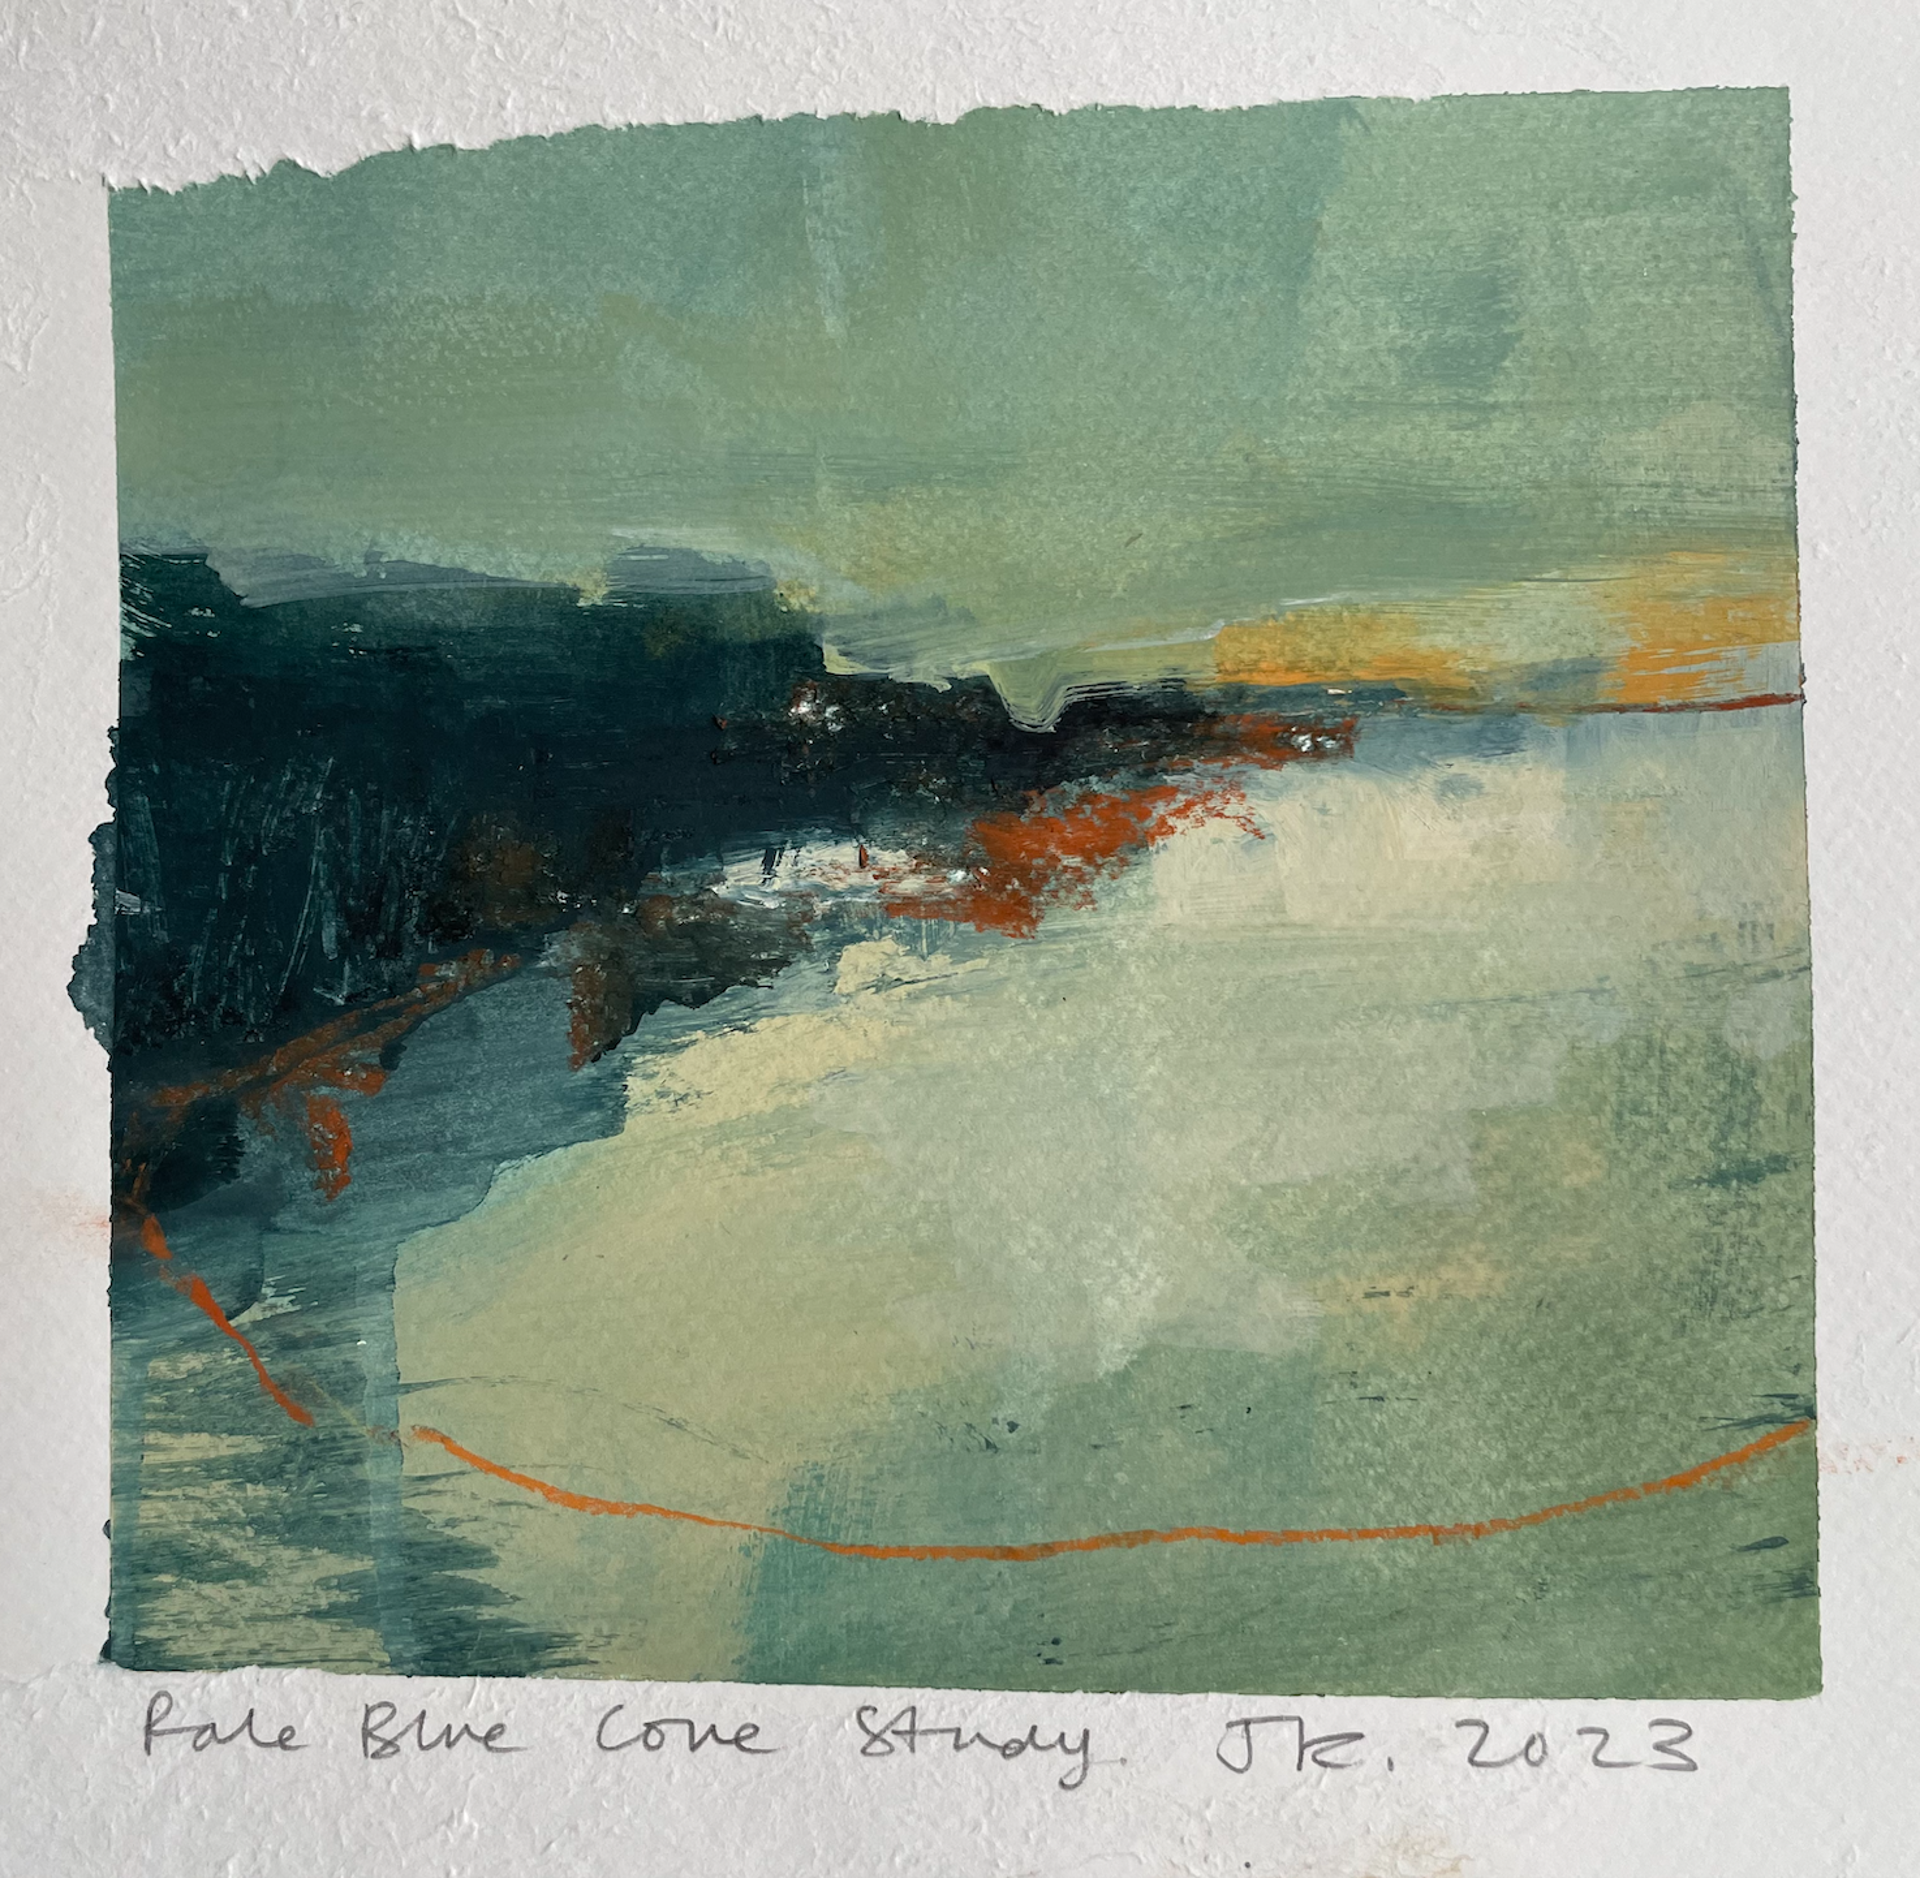 Pale Blue Cove Study by Jane Kell